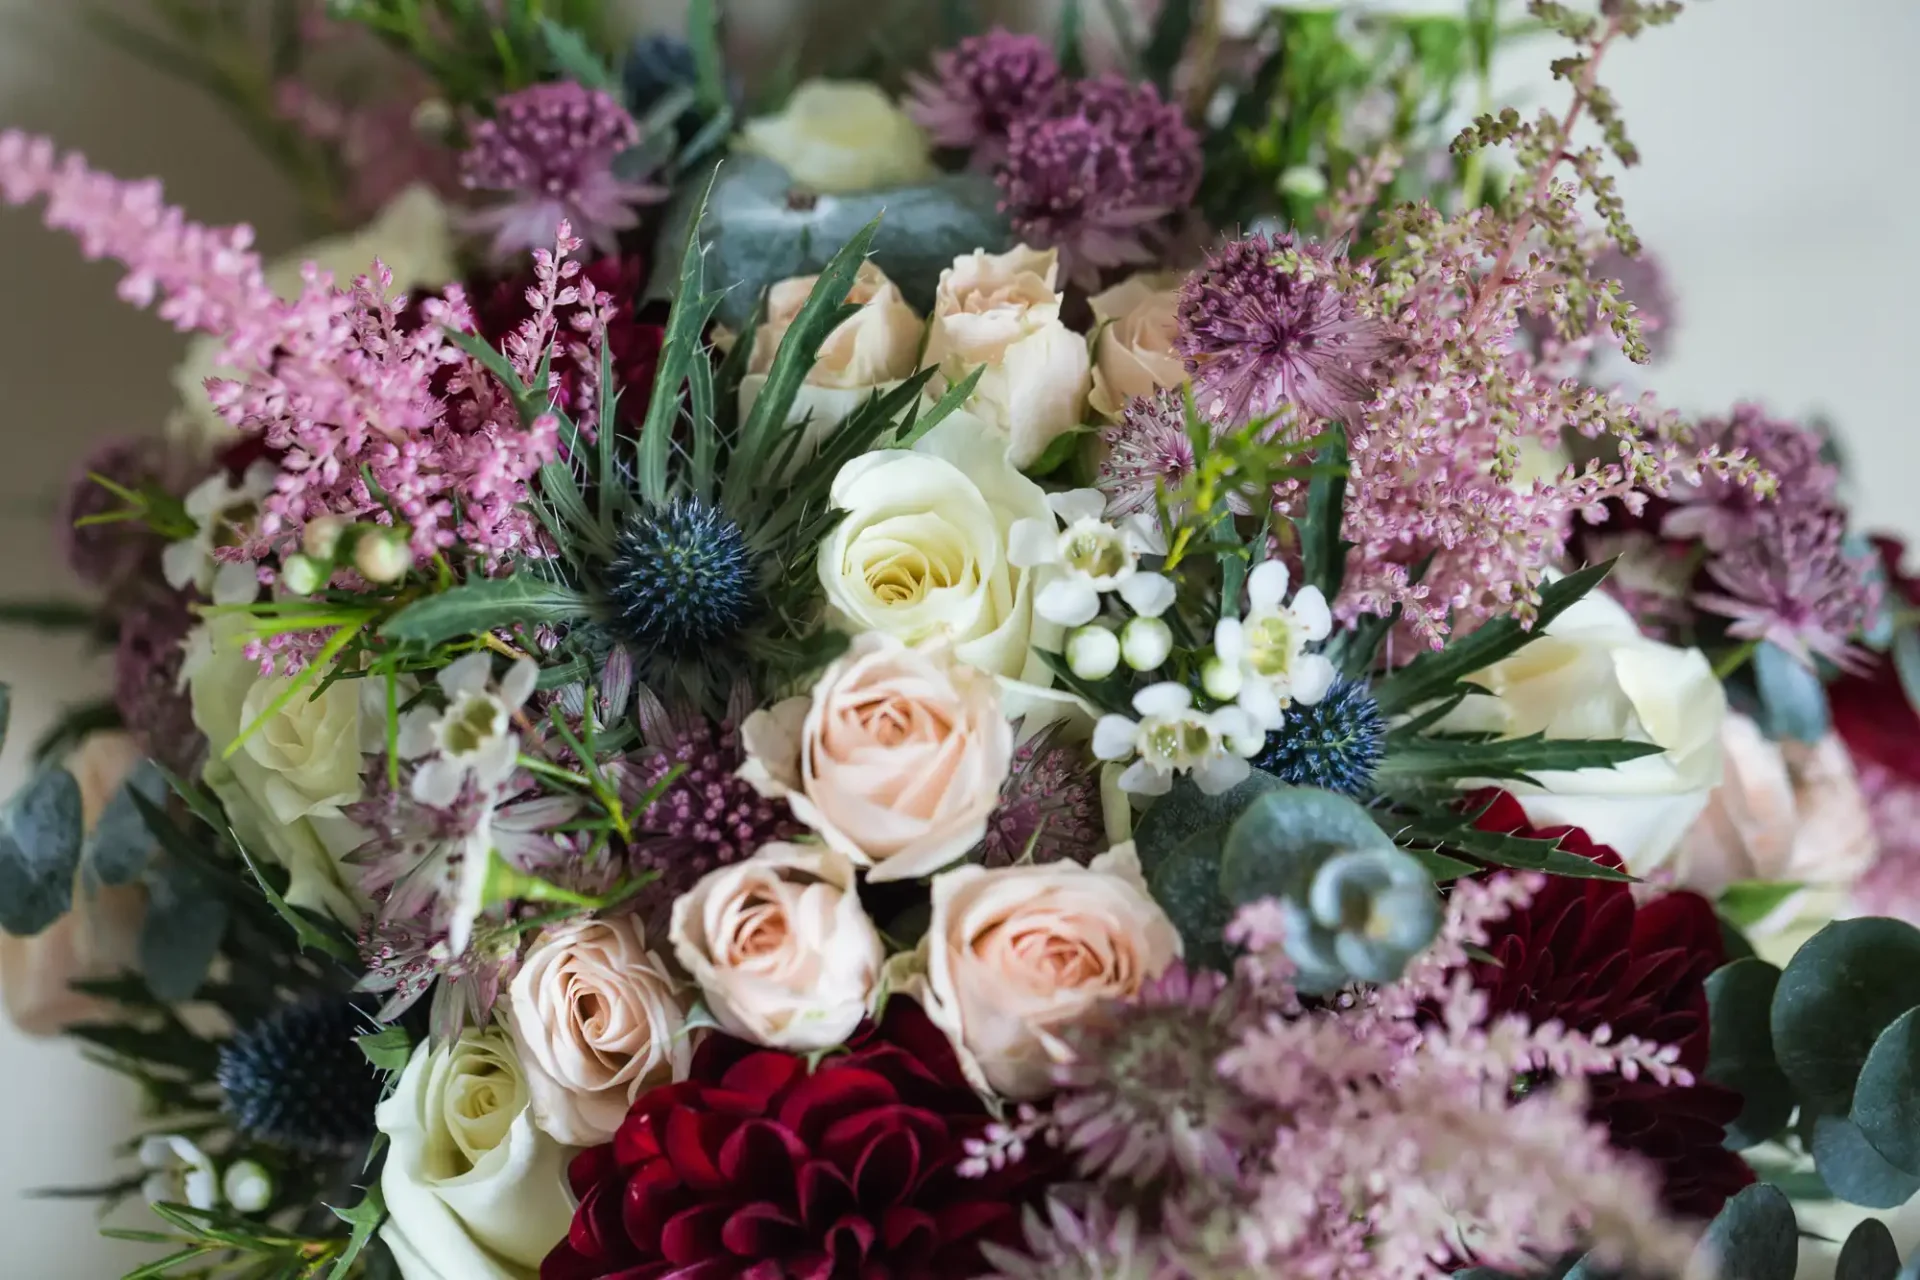 Close-up of a floral arrangement featuring pale pink roses, deep red dahlias, purple asters, white blooms, and green foliage.